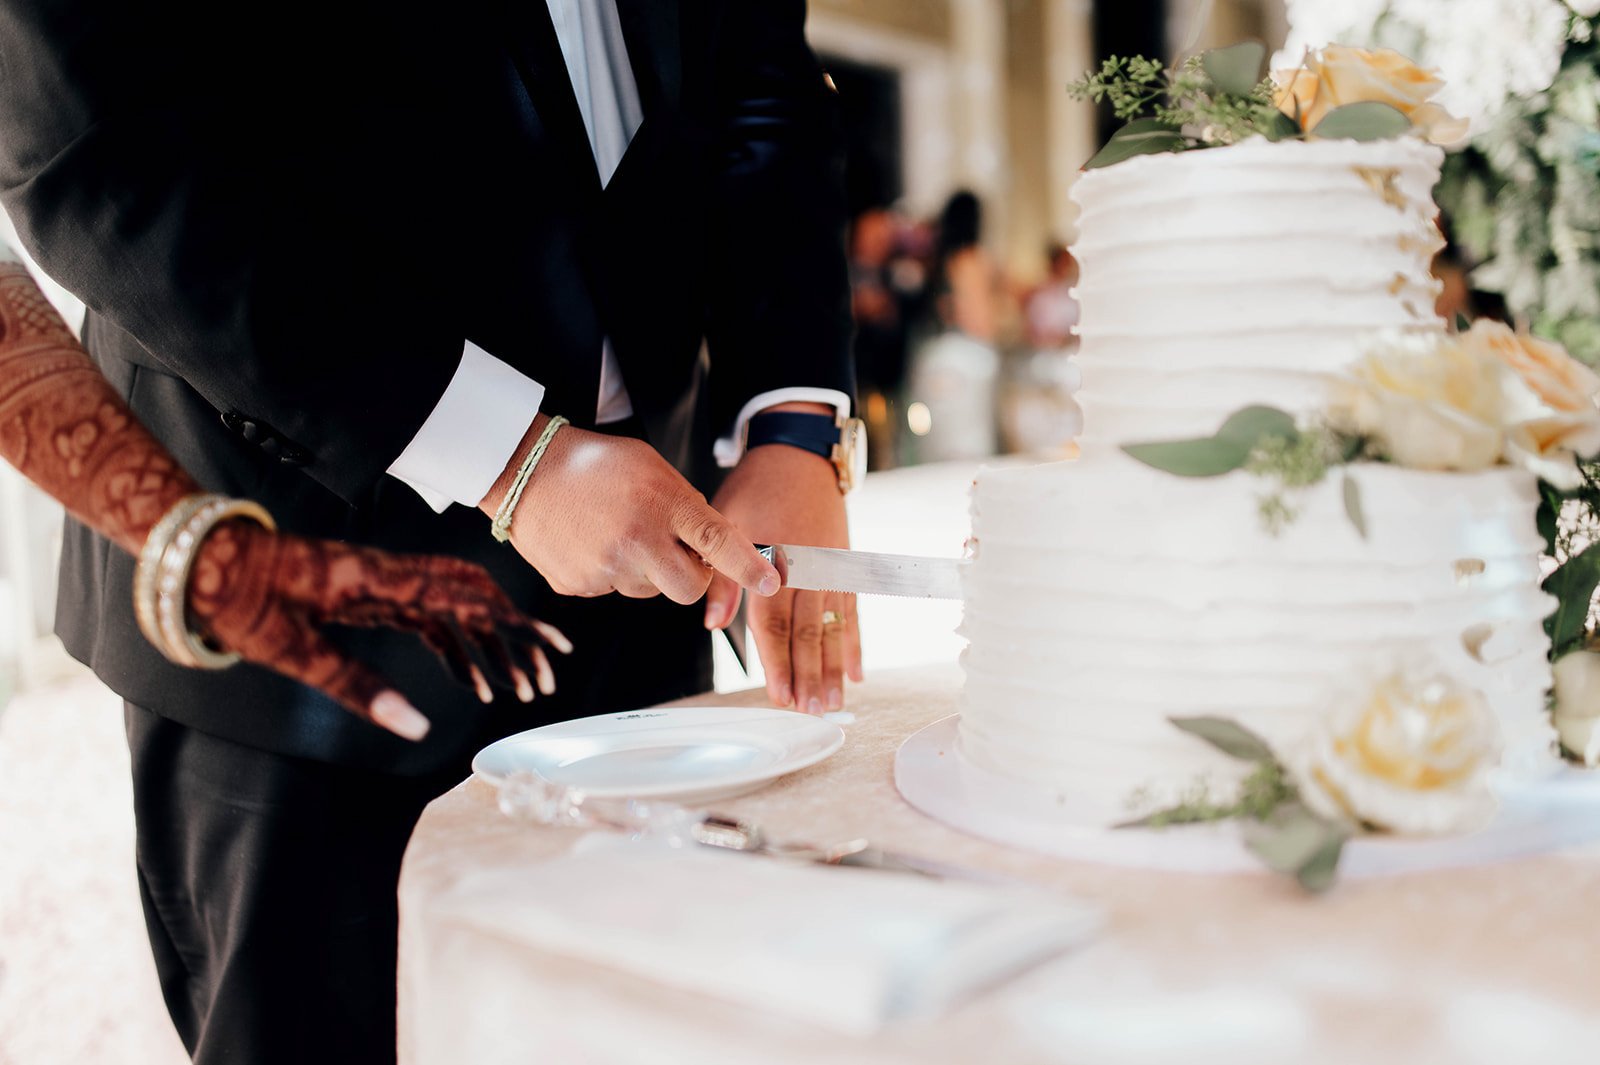 a close up of a groom cutting a wedding cake with his wife's assistance. 